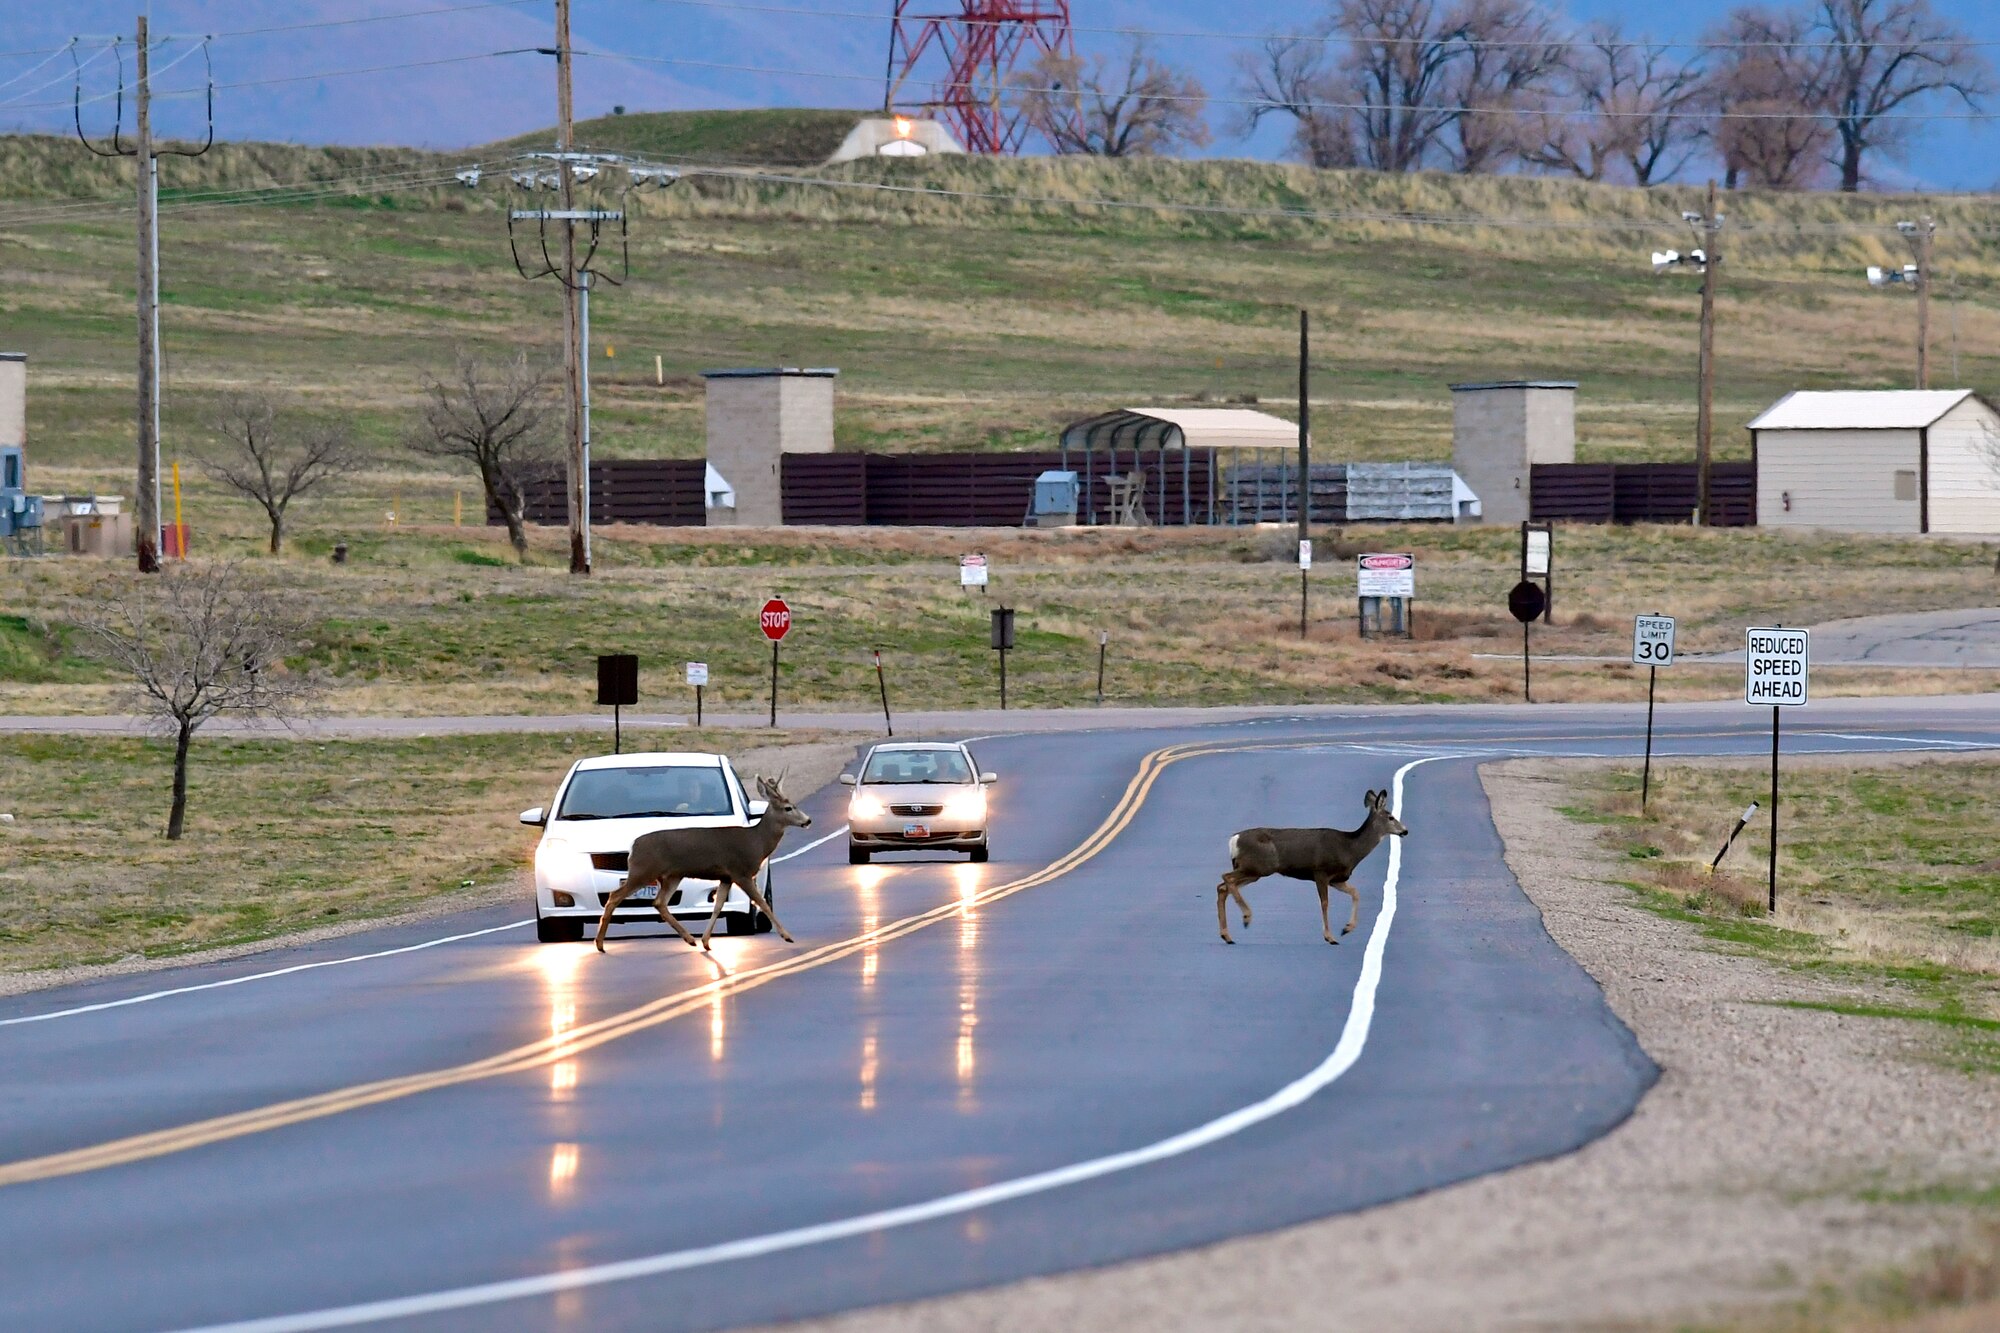 Deer regularly cross Wardleigh Road at Hill Air Force Base, Utah.
Local Mule Deer activity is more likely to occur in the early morning and around sunset, which coincides with peak commuting hours. This is also when low-light conditions make it difficult for motorists to see. (U.S Air Force photo by Todd Cromar)